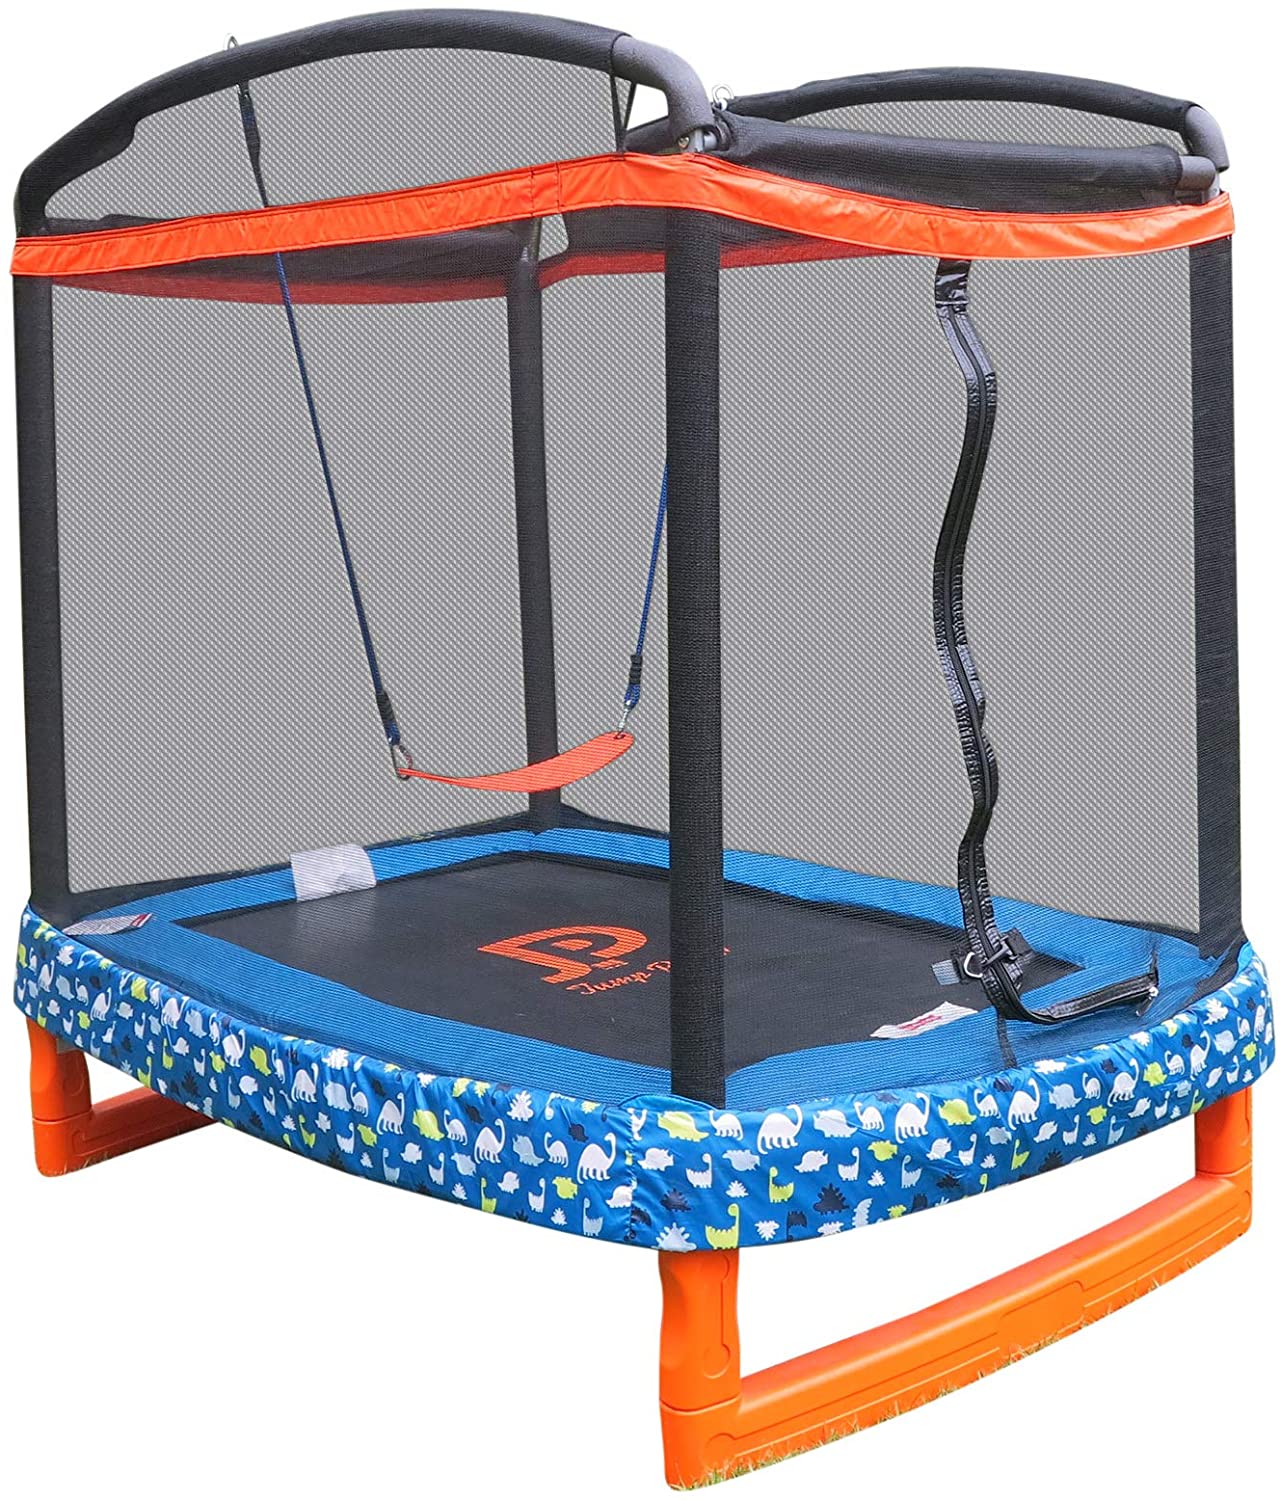 JUMP POWER 72” x 50” Rectangle Indoor,Outdoor Trampoline & Safety Net with Swing Combo for Toddlers & Kids